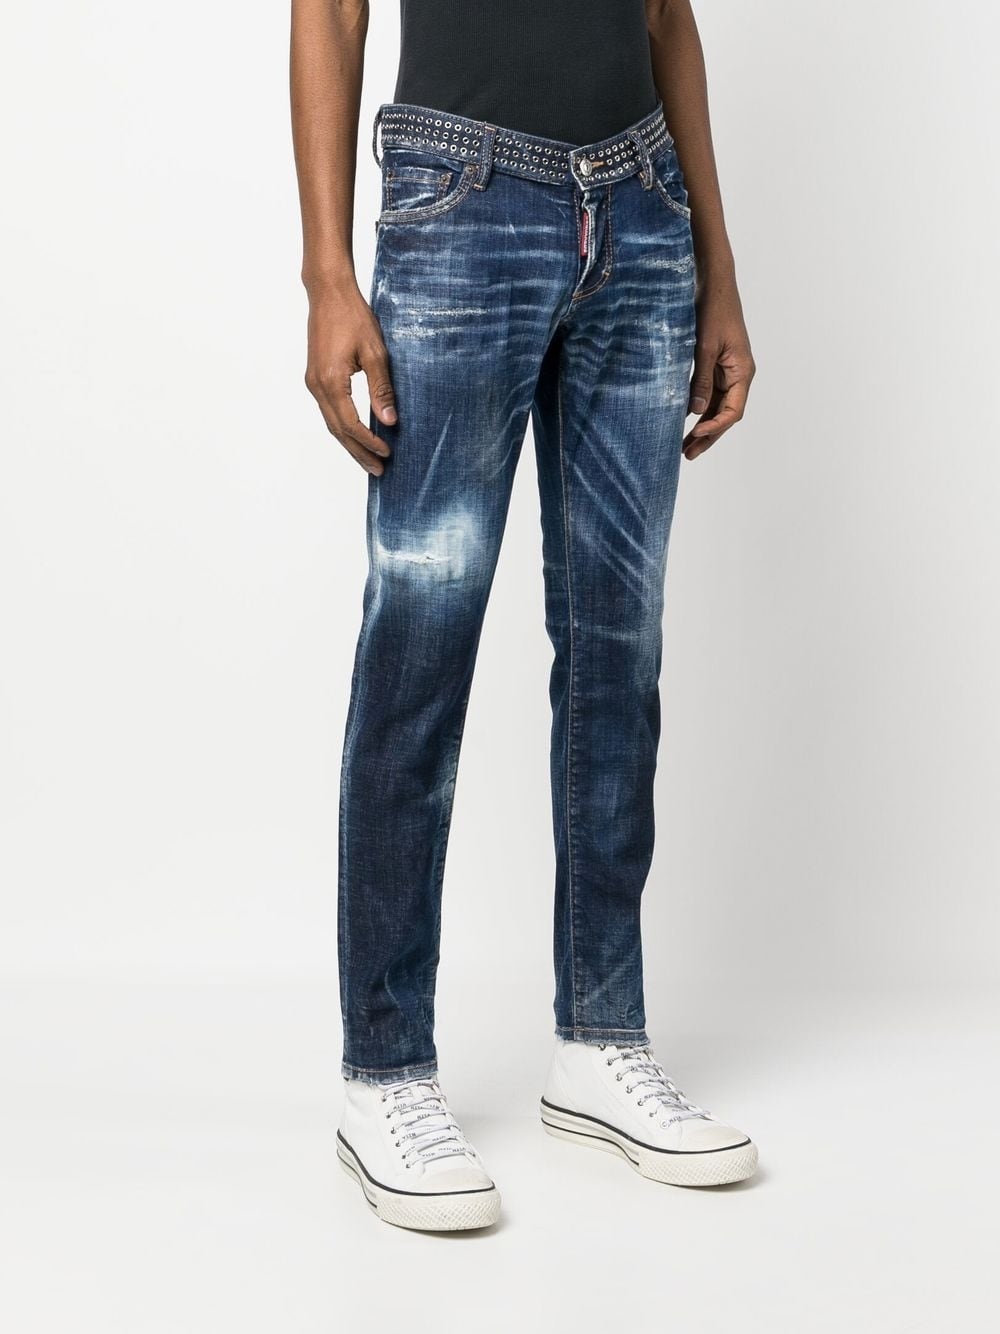 DSQUARED2 Modern & Edgy Studded Slim-Cut Stretch Jeans for Men - Navy Blue